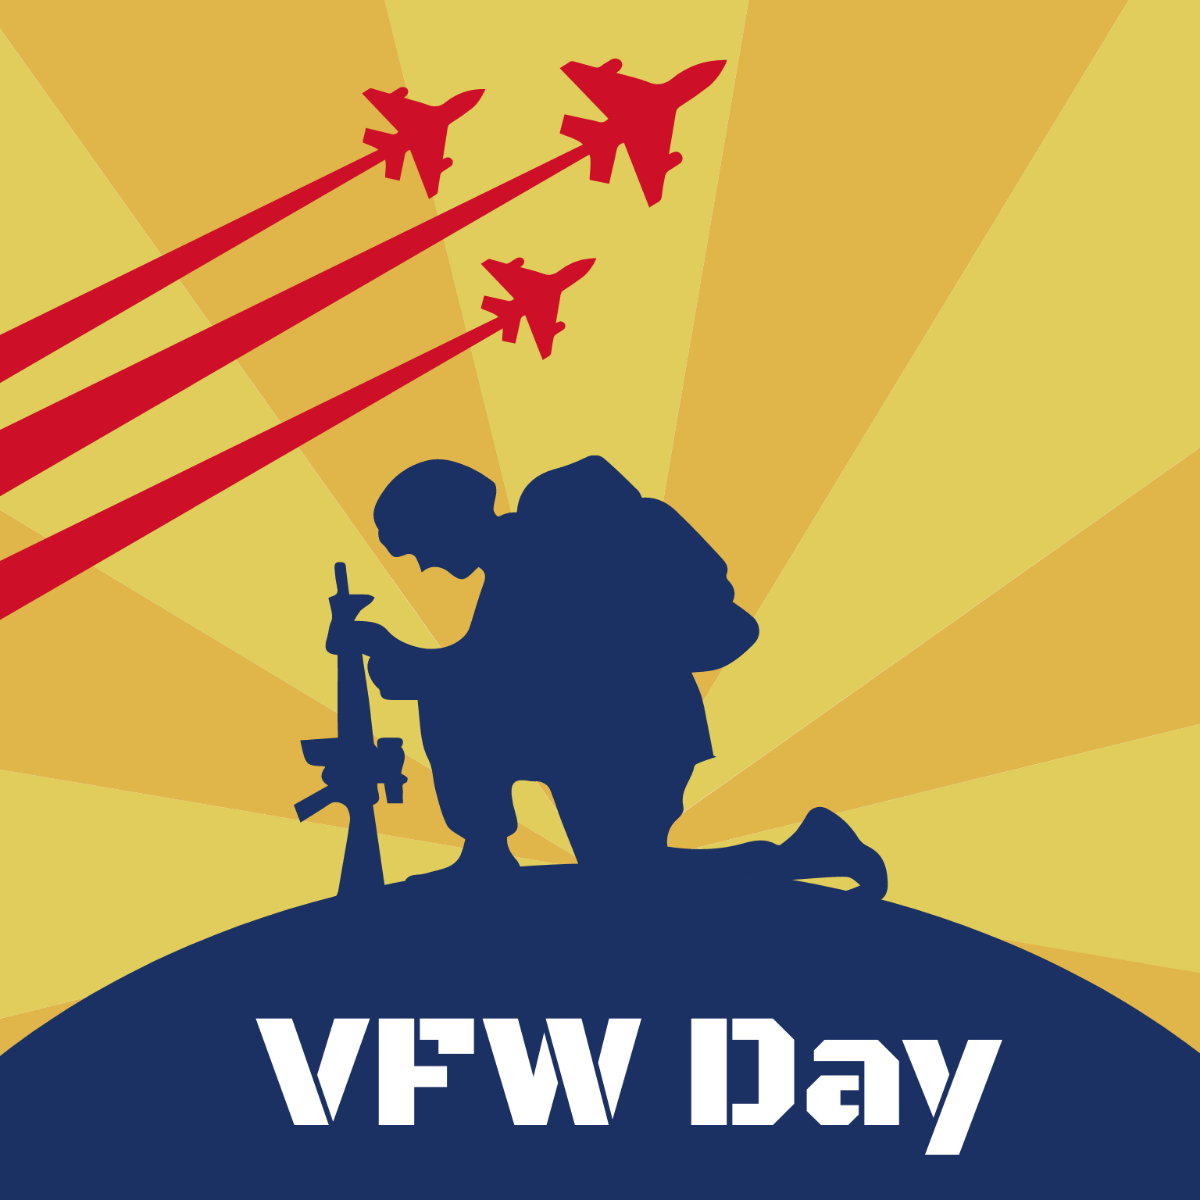 Free Happy VFW Day Illustration Template